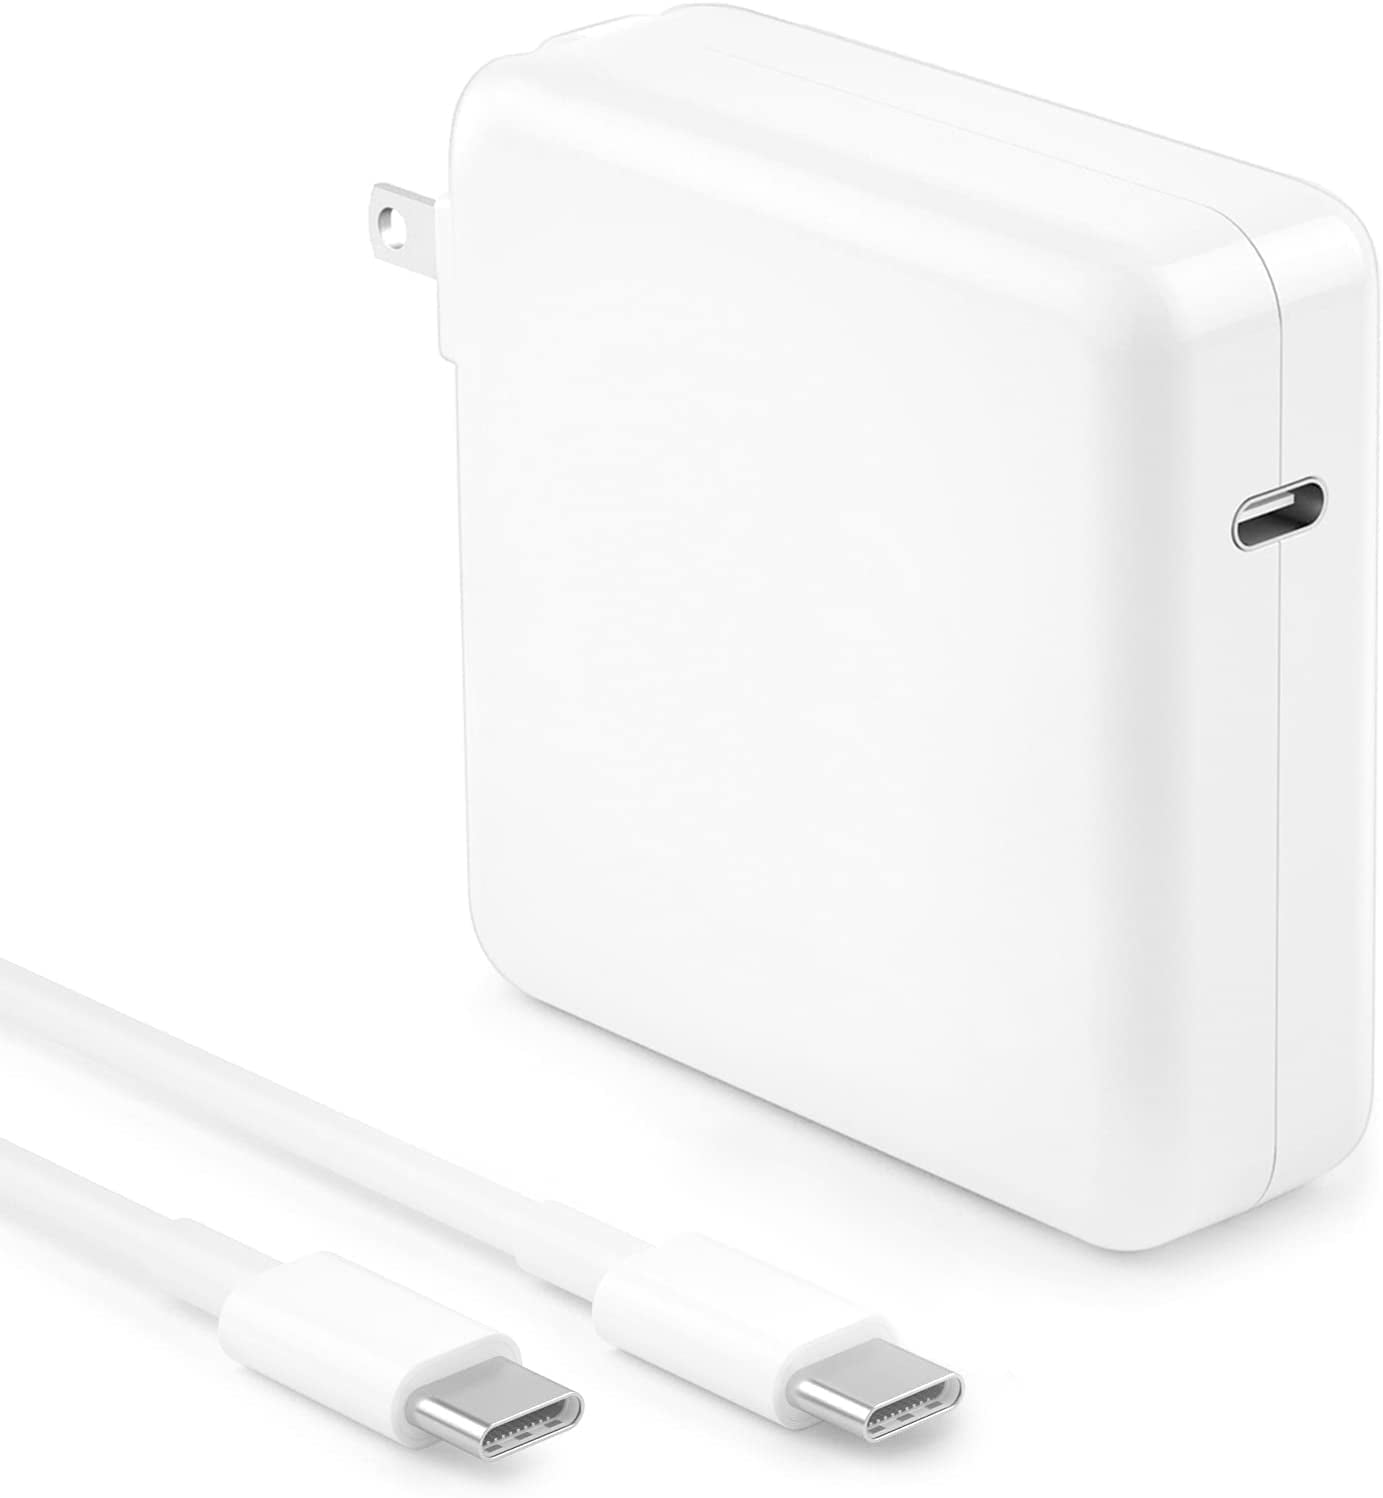 Mac Book Pro Charger - 118W USB C Charger Fast Charger for MacBook